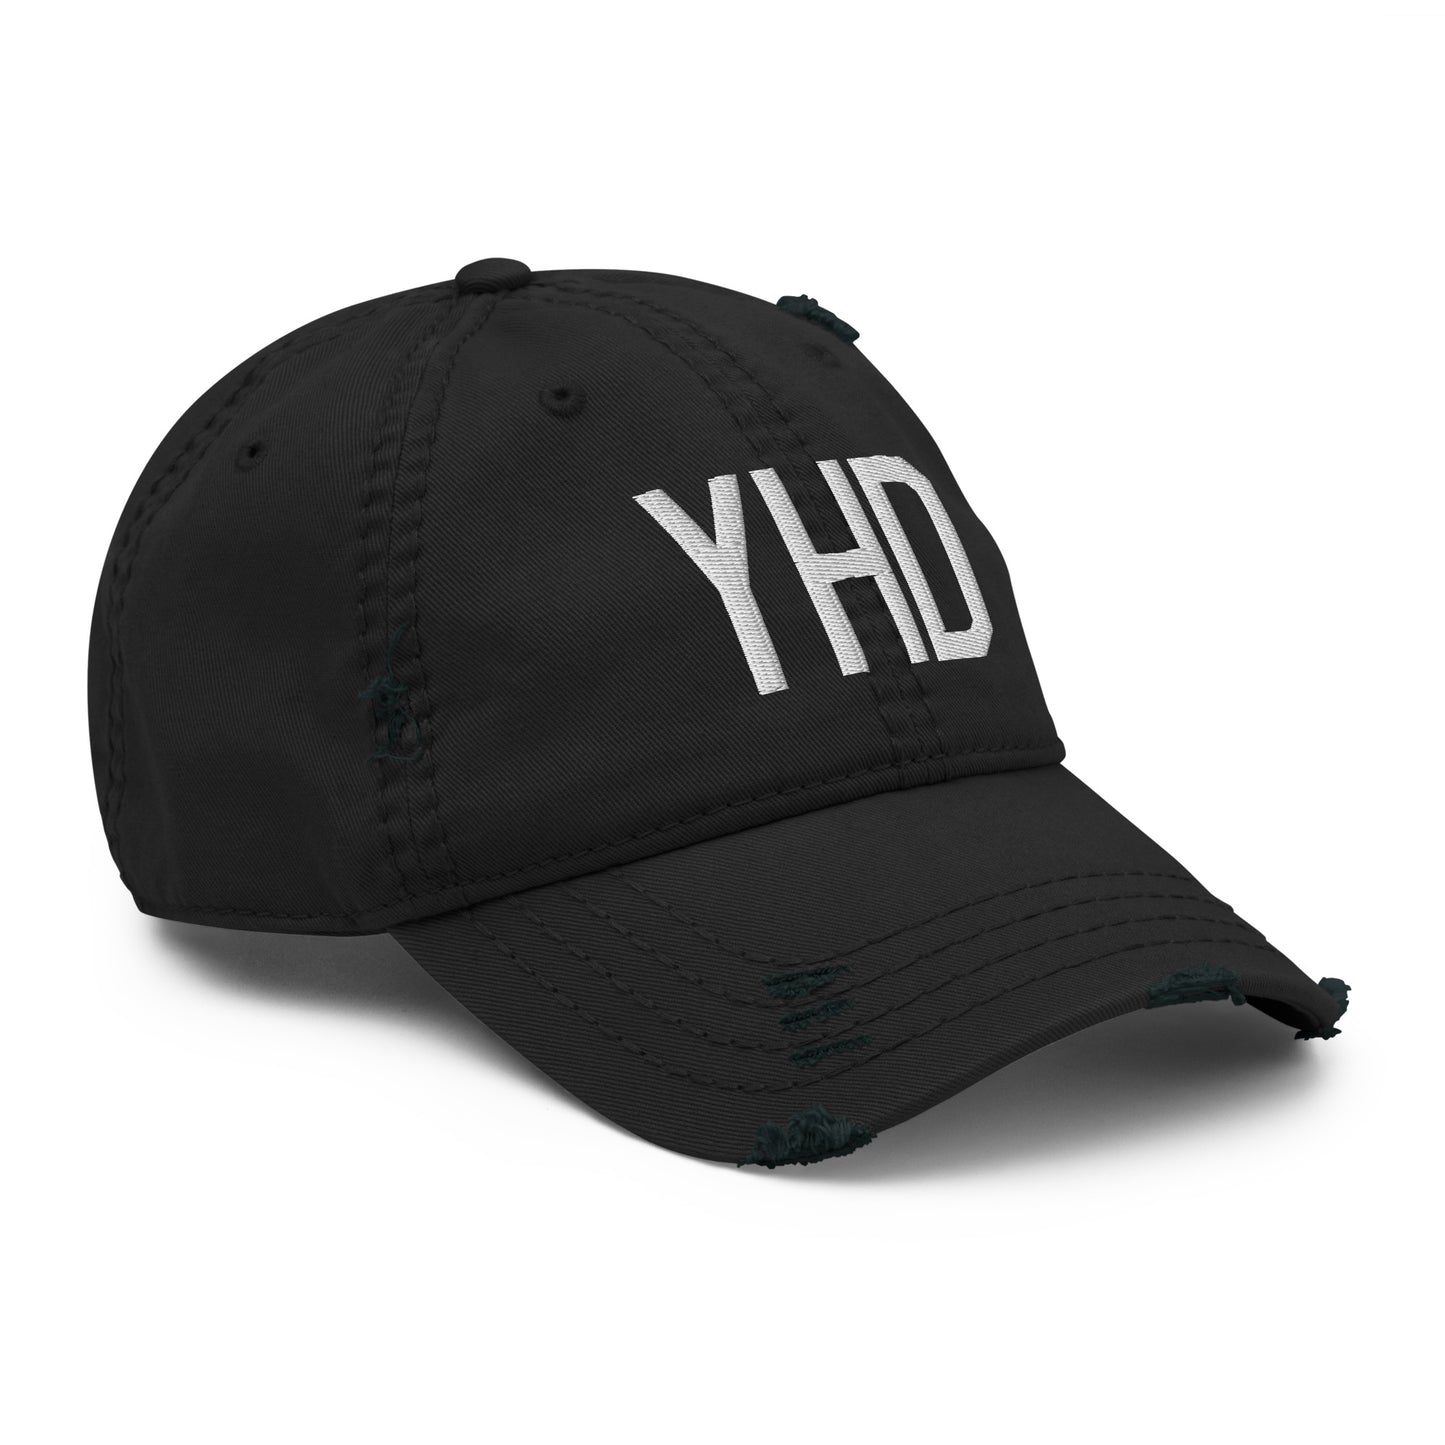 Airport Code Distressed Hat - White • YHD Dryden • YHM Designs - Image 12